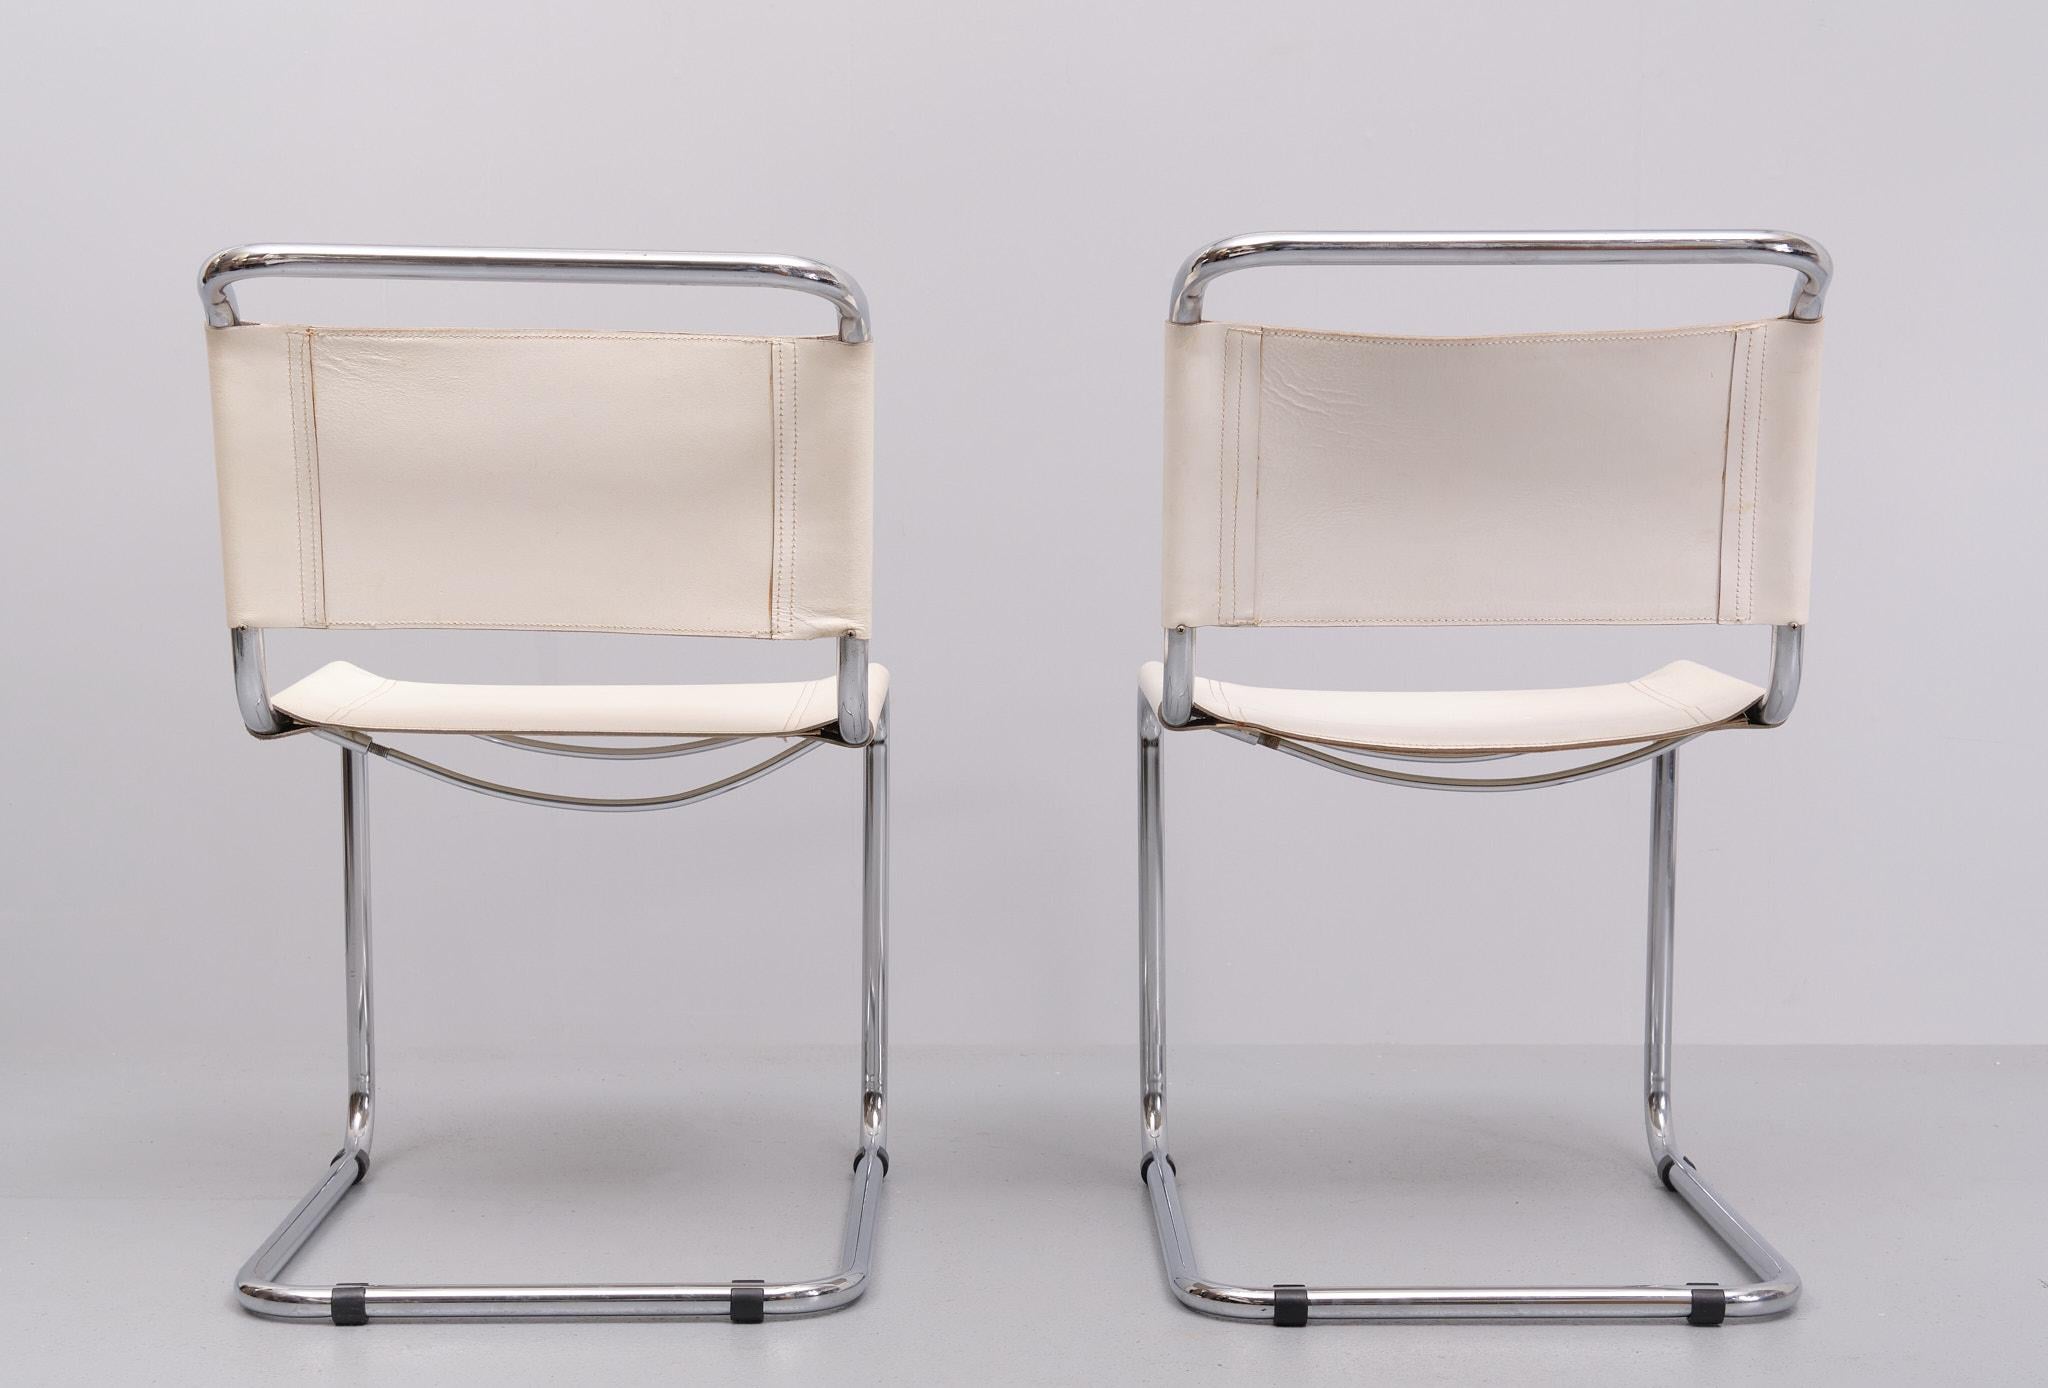 Italian pair Mart stam S33 cantilever chairs  1970s  For Sale